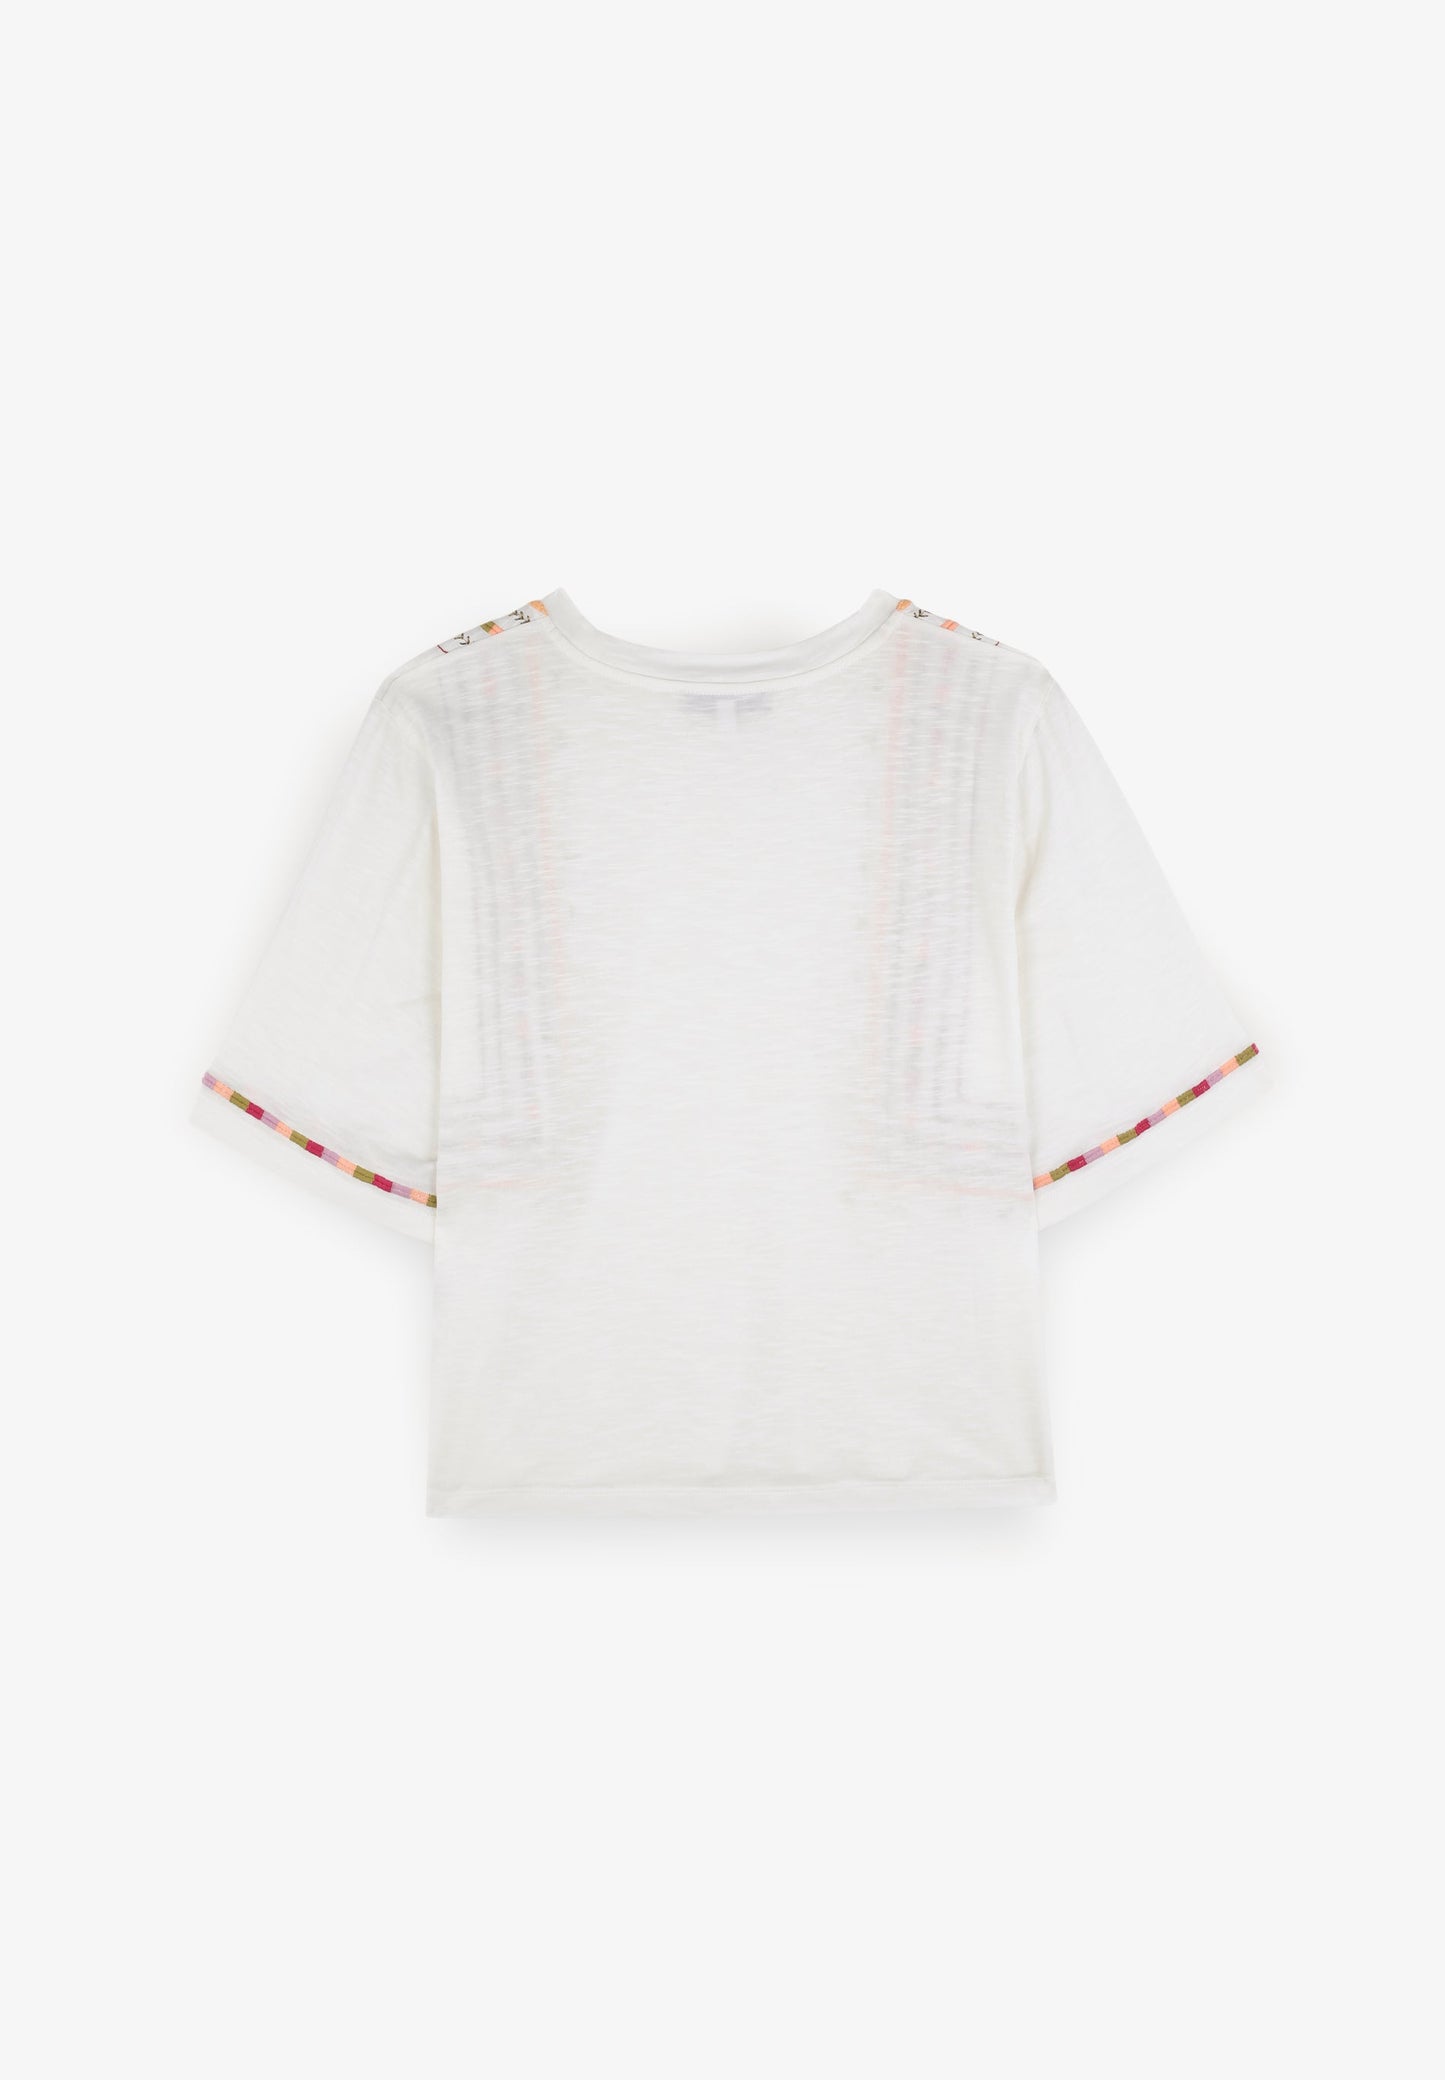 EMBROIDERED ETHNIC T-SHIRT